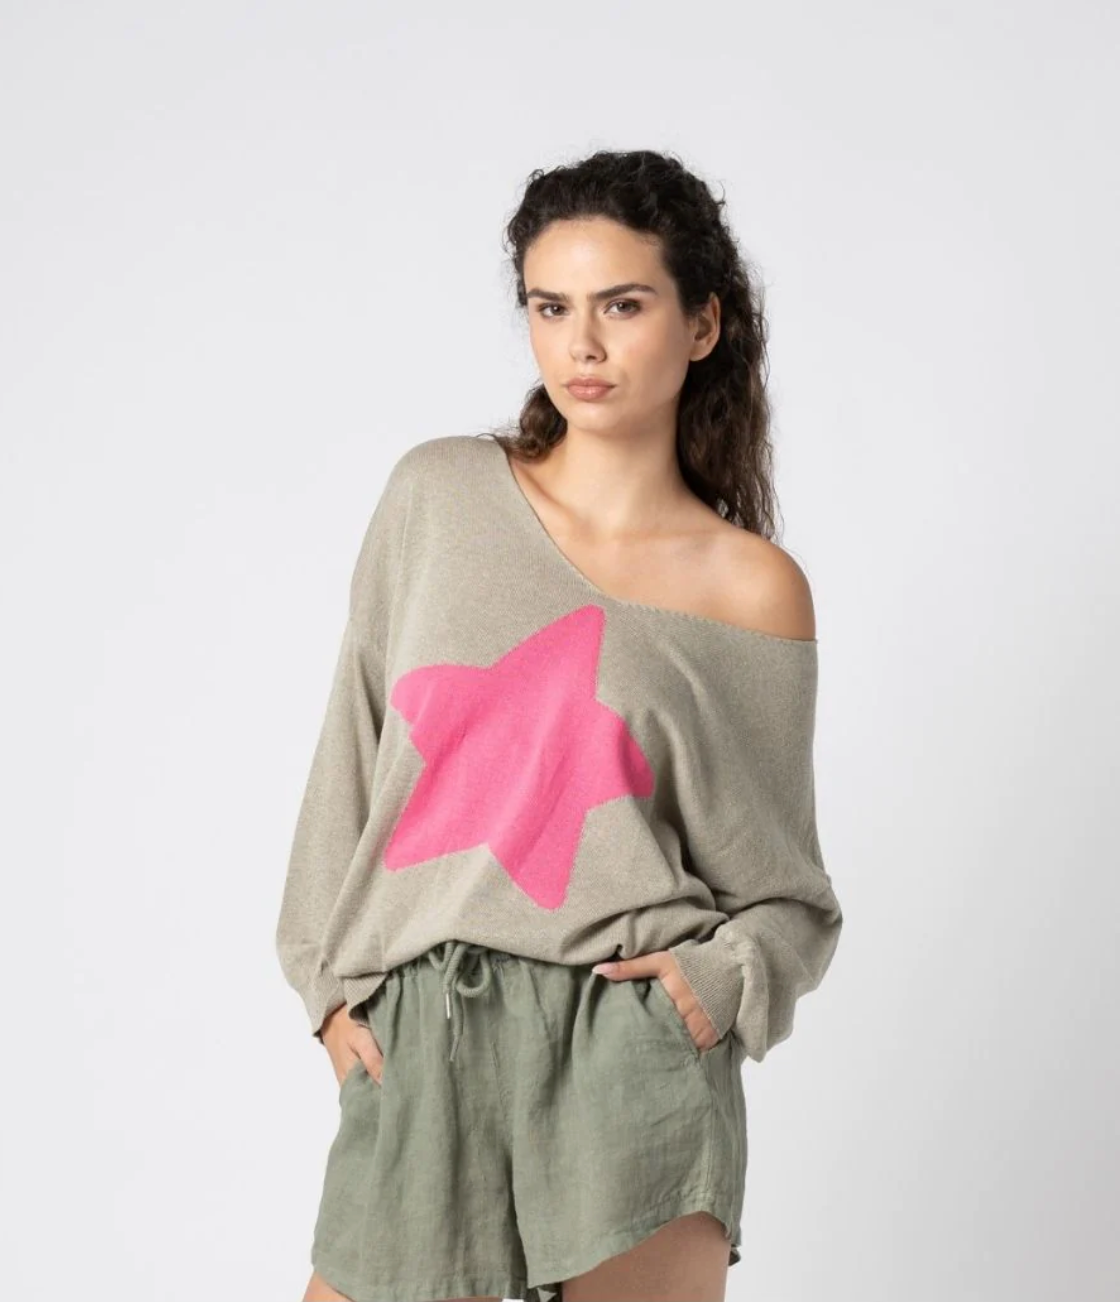 Astrid Italy North Star Knit Sweater in Cargo - Jaunts Boutique 